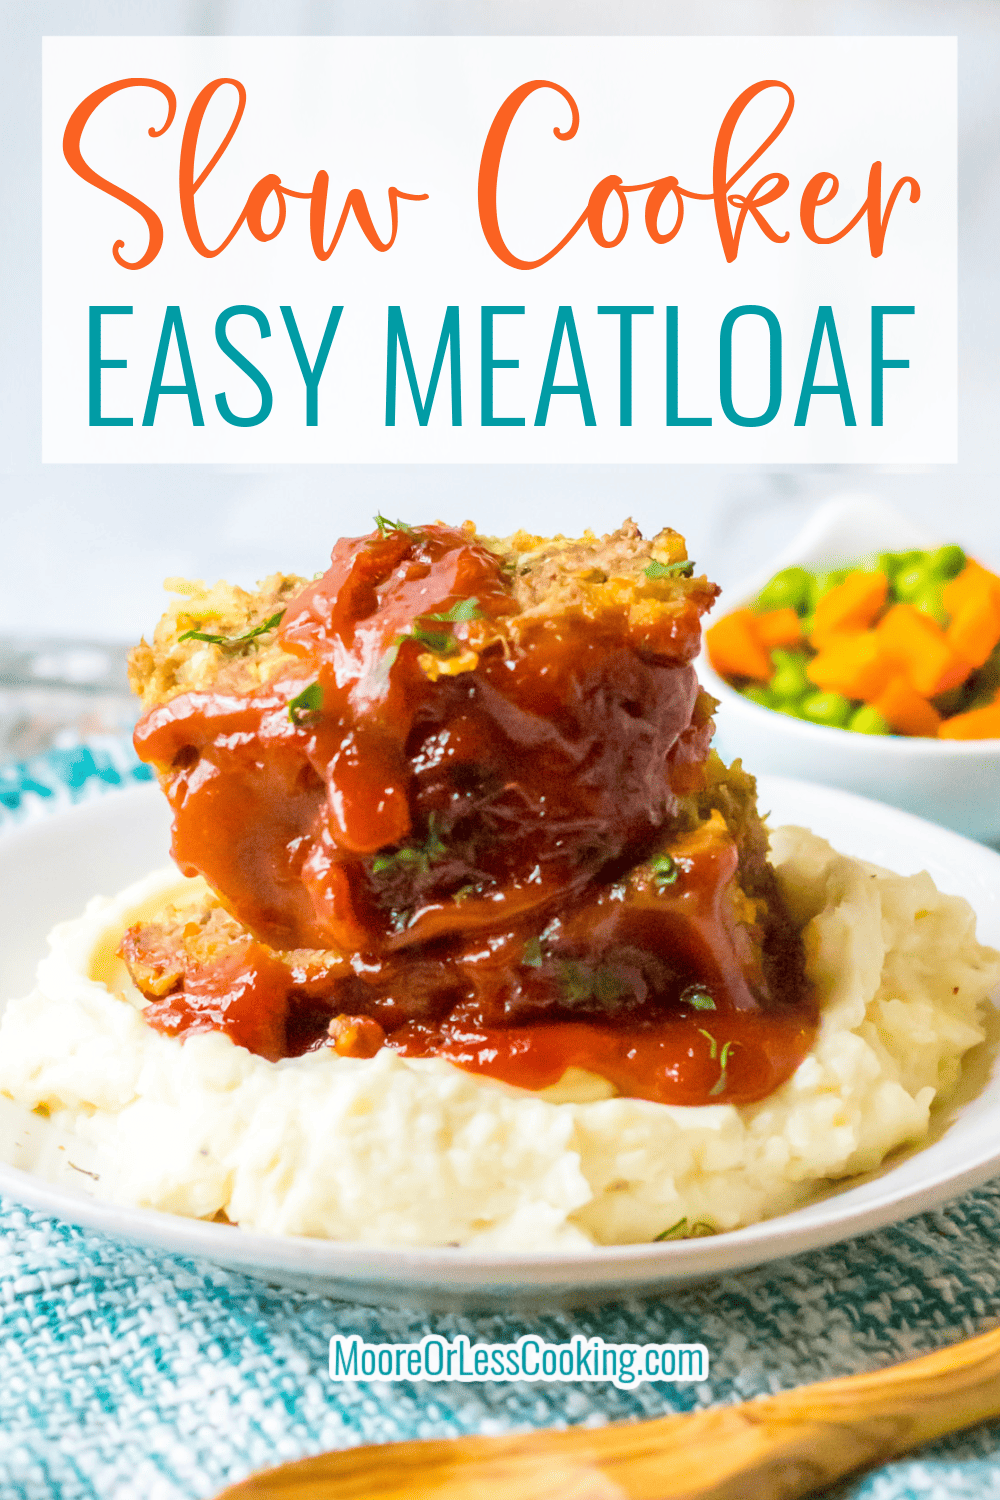 Outrageously flavorful, this mouth-watering Slow Cooker Easy Meatloaf recipe will become your new favorite comfort food meal. Cooking it low and slow keeps it tender while it's infused with savory seasonings from the scrumptious homemade sauce and glaze. via @Mooreorlesscook